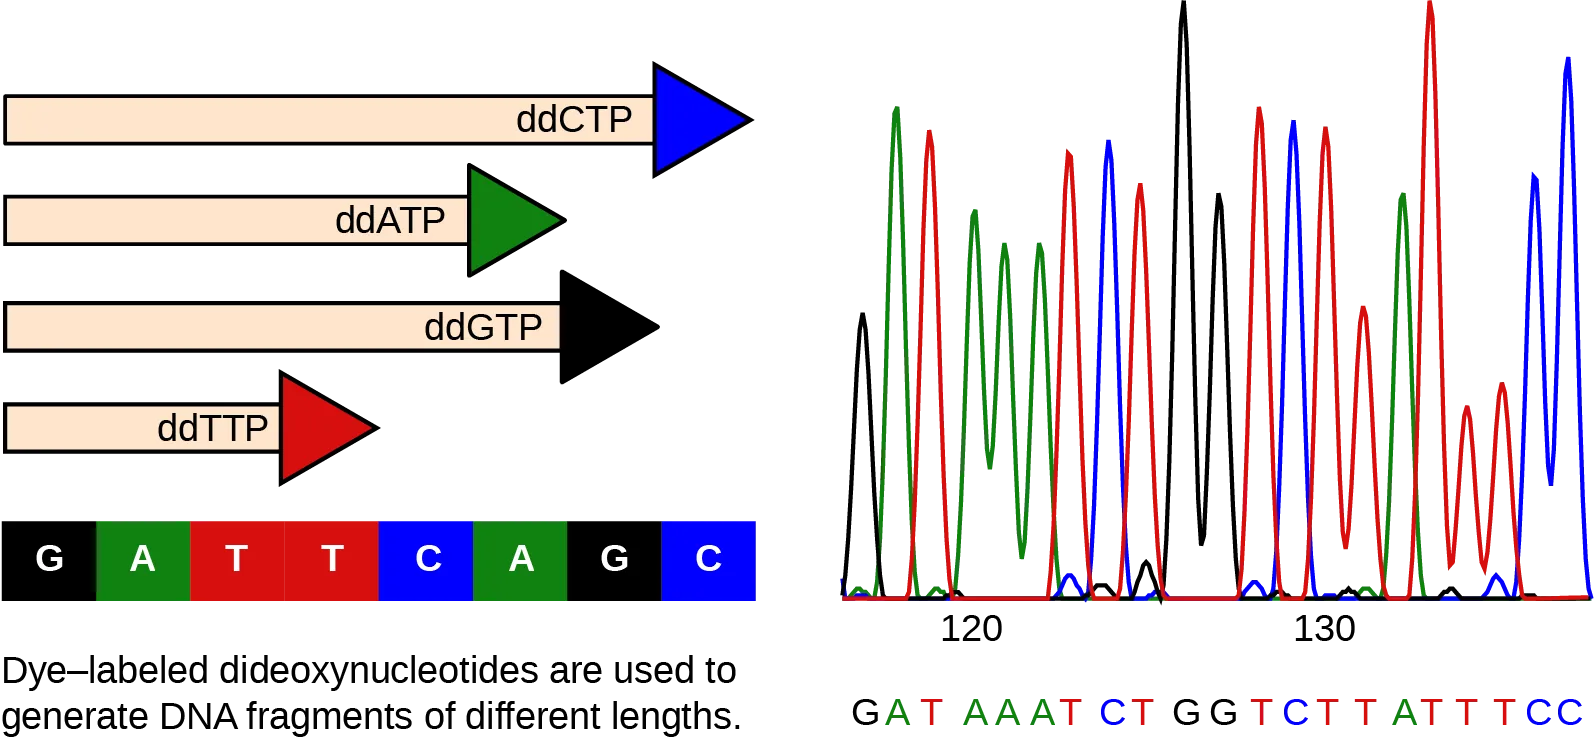 The left part of this illustration shows a parent strand of D N A with the sequence G A T T C A G C, and four daughter strands, each of which was made in the presence of a different dideoxynucleotide: lower case d lower case d upper case A upper case T upper case P, and lower case d lower case d upper case C upper case T upper case P, and lower d lower d upper G upper T upper P, or lower d lower d upper T upper T upper P. The growing chain terminates when a lower d lower d upper N T P is incorporated, resulting in daughter strands of different lengths. The right part of this image shows the separation of the D N A fragments on the basis of size. Each lower d lower d upper N T P is fluorescently labeled with a different color so that the sequence can be read by the size of each fragment and its color.